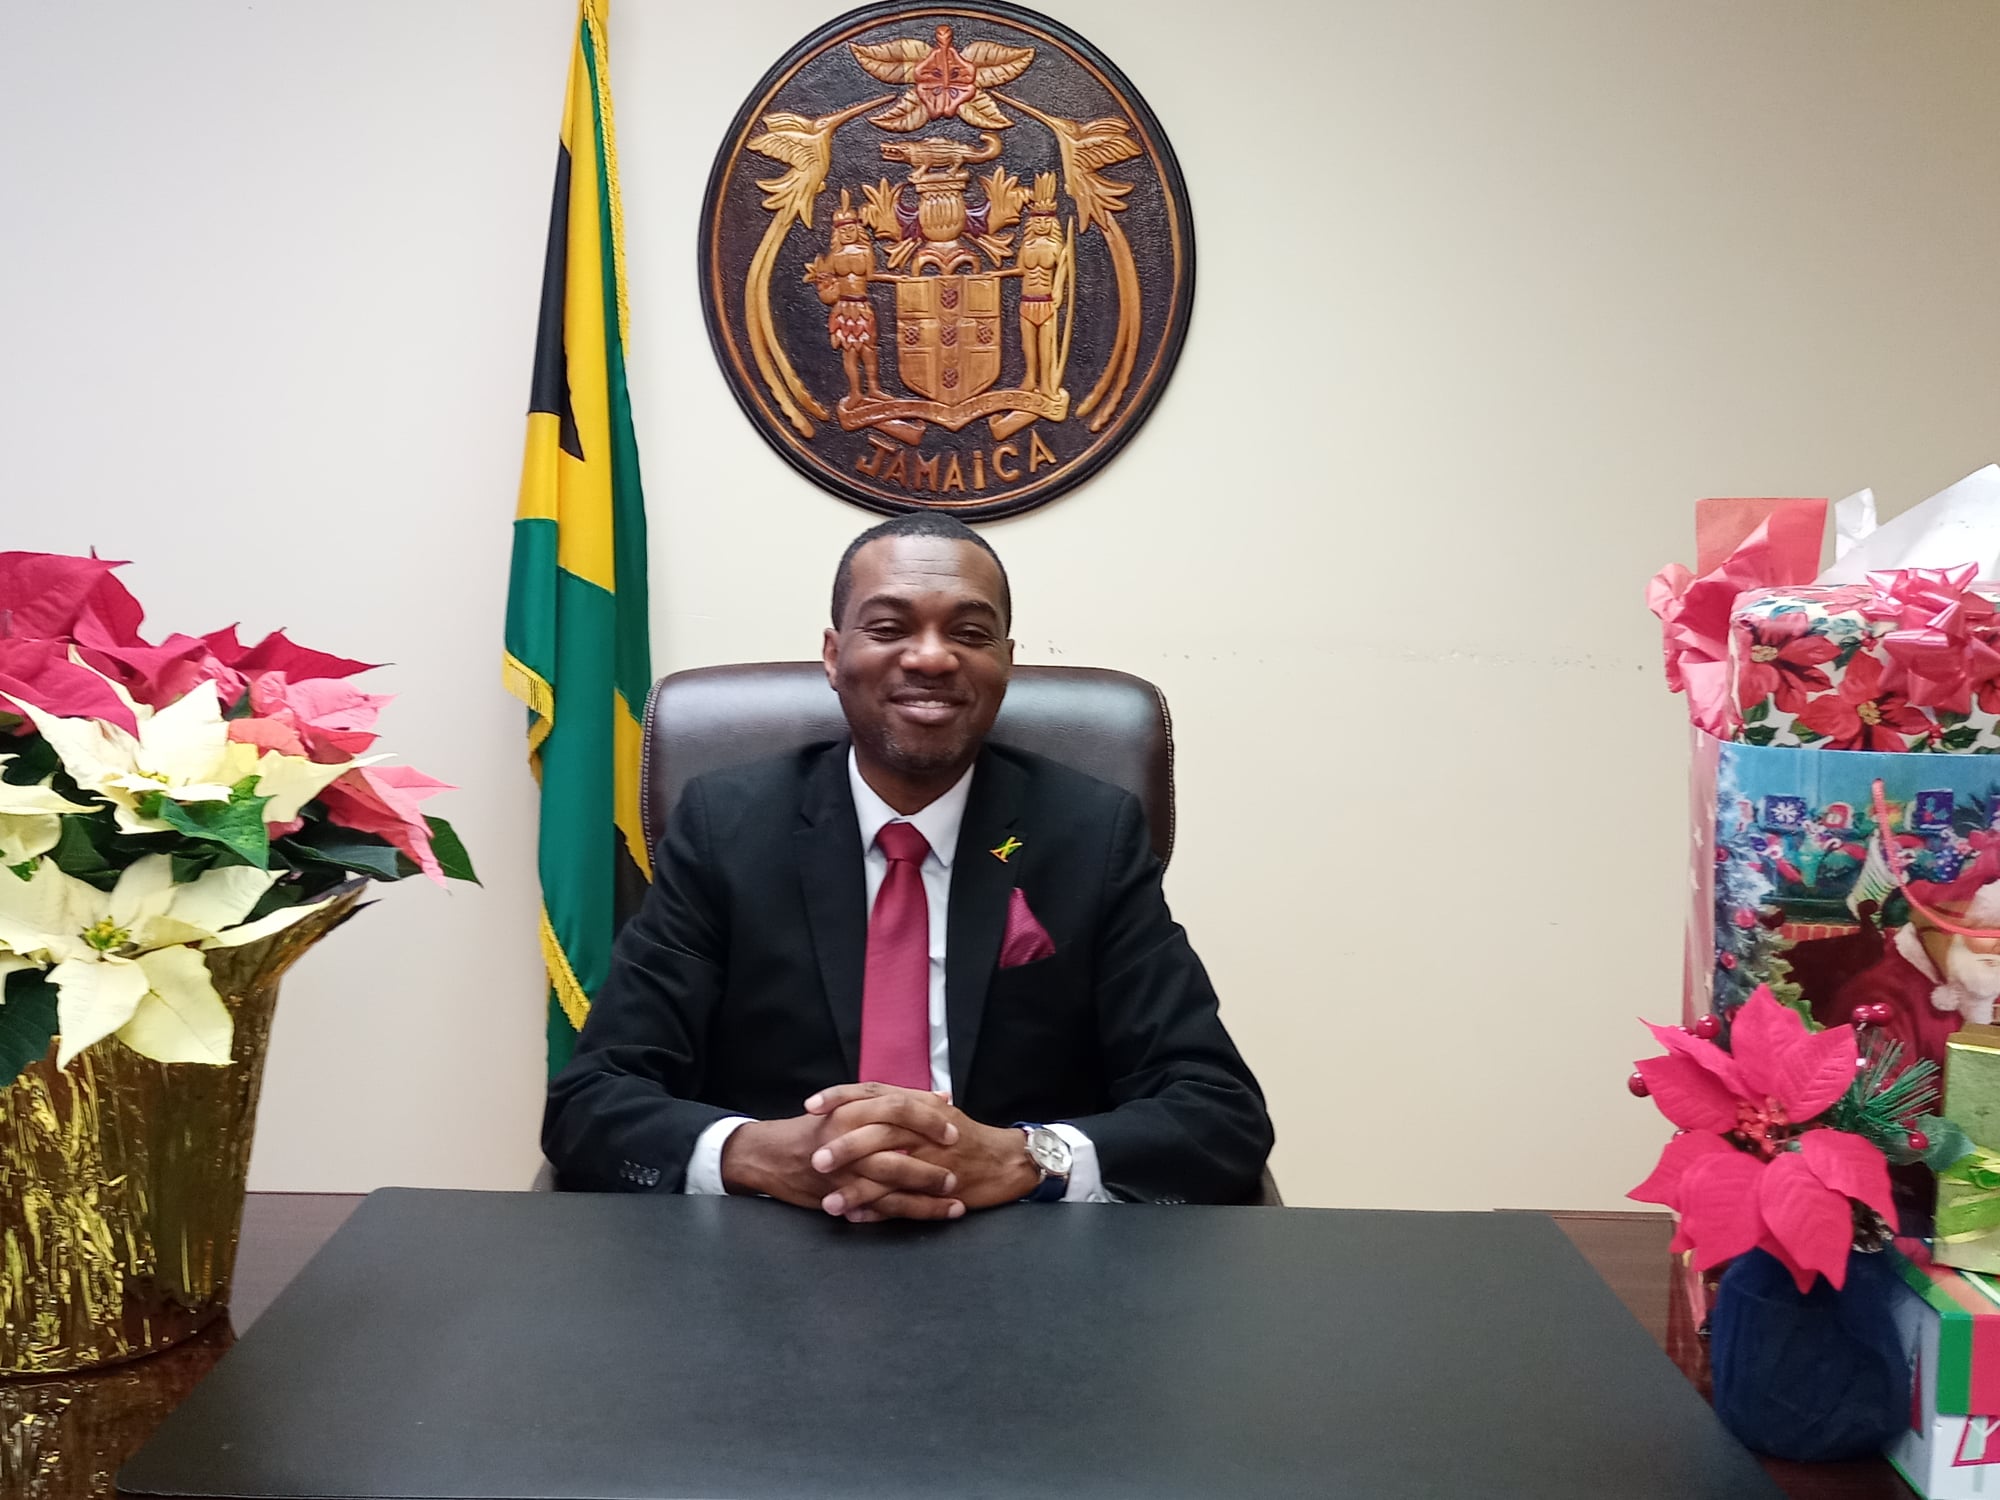 Christmas message from the Consulate-General of Jamaica, Toronto